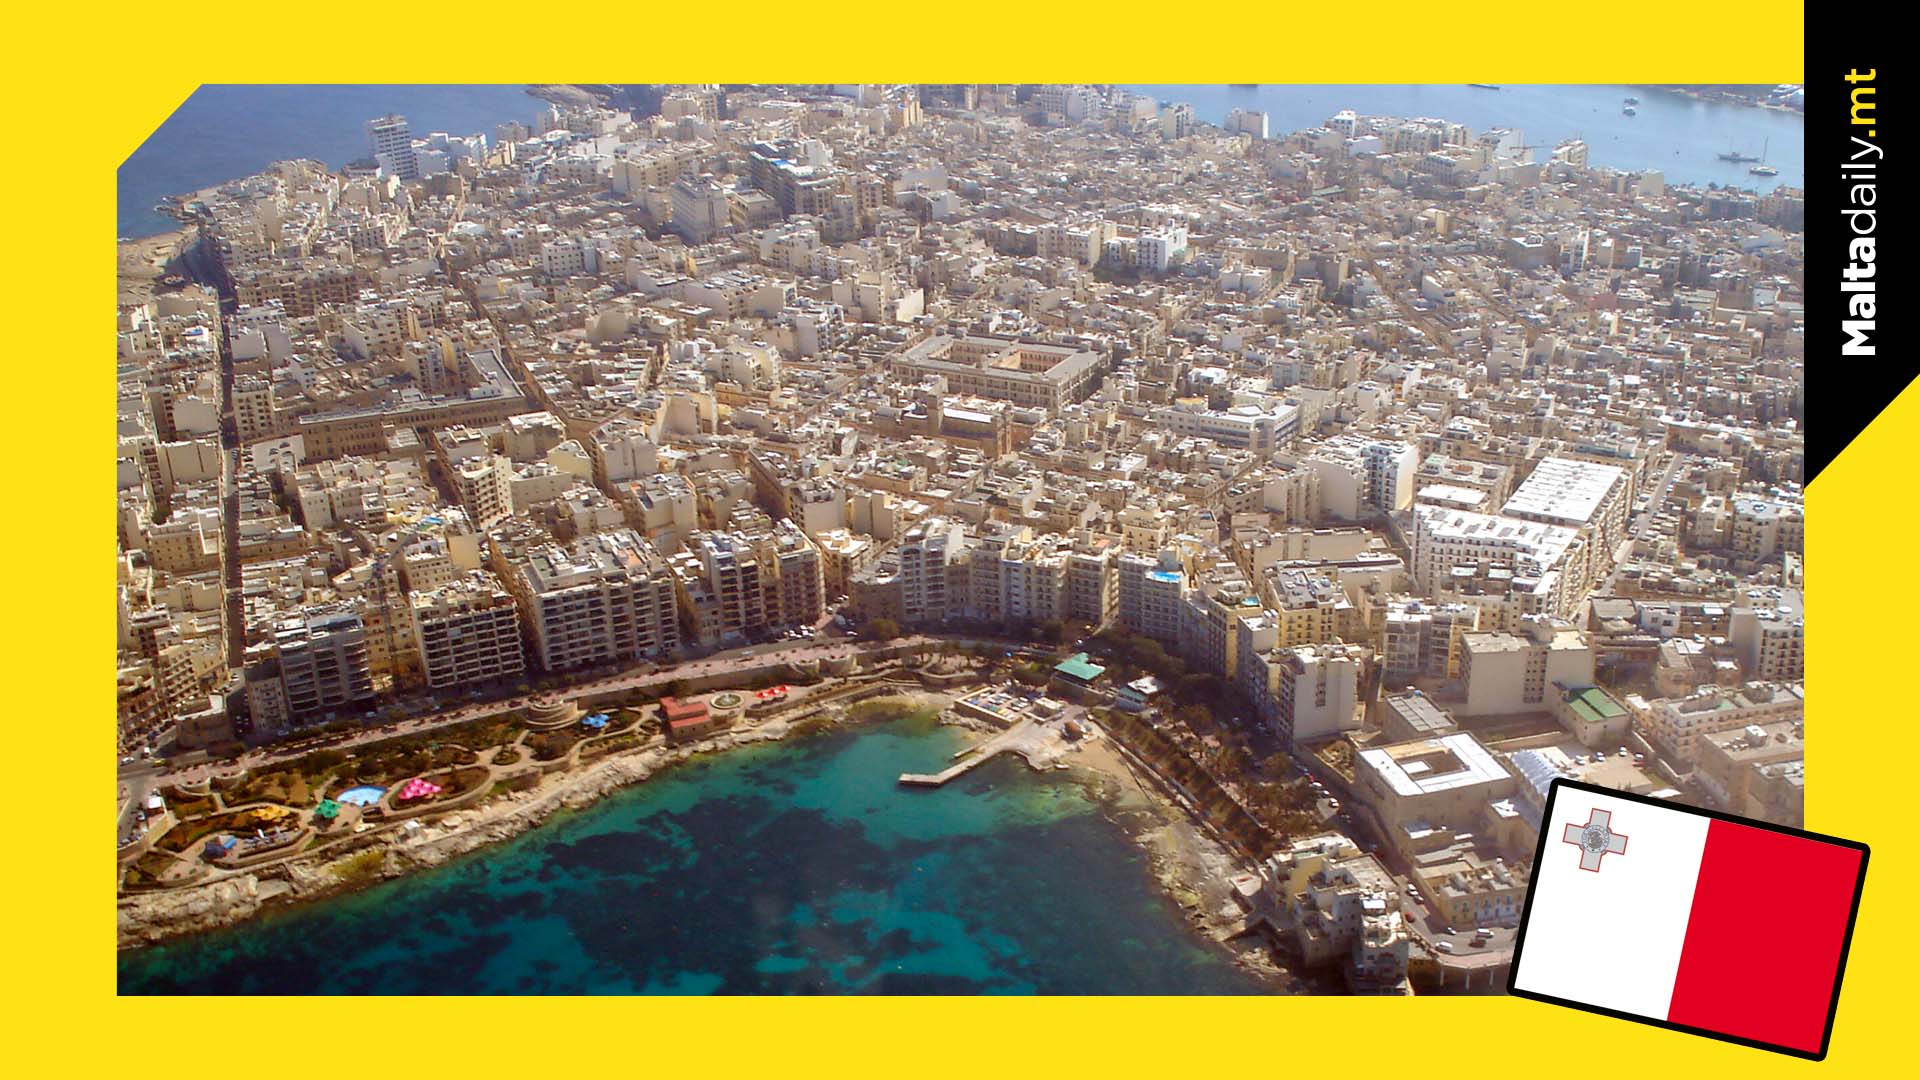 Maltese in urbanised towns reported lowest life satisfaction in 2021